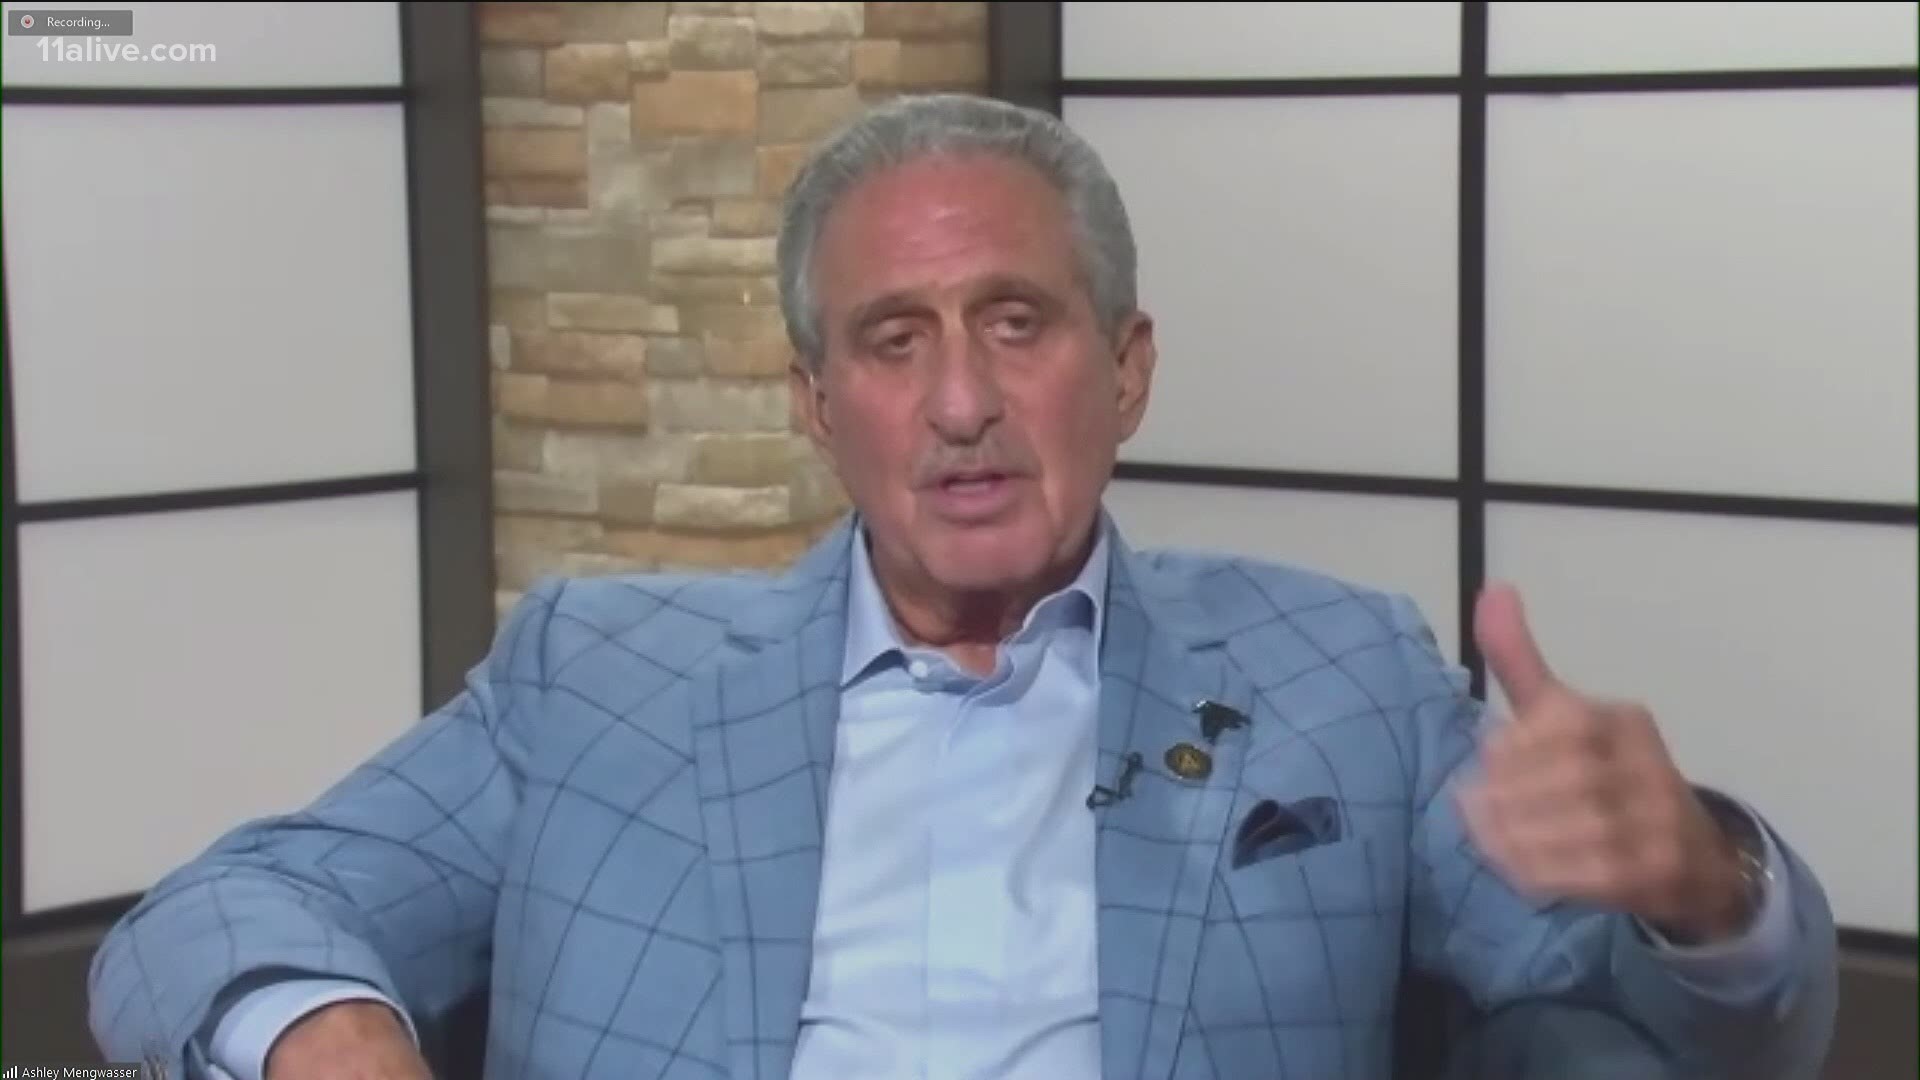 In a fascinating new book, 'Good Company,' Arthur Blank details how he built his business over the years and ultimately became the owner of the Atlanta Falcons.